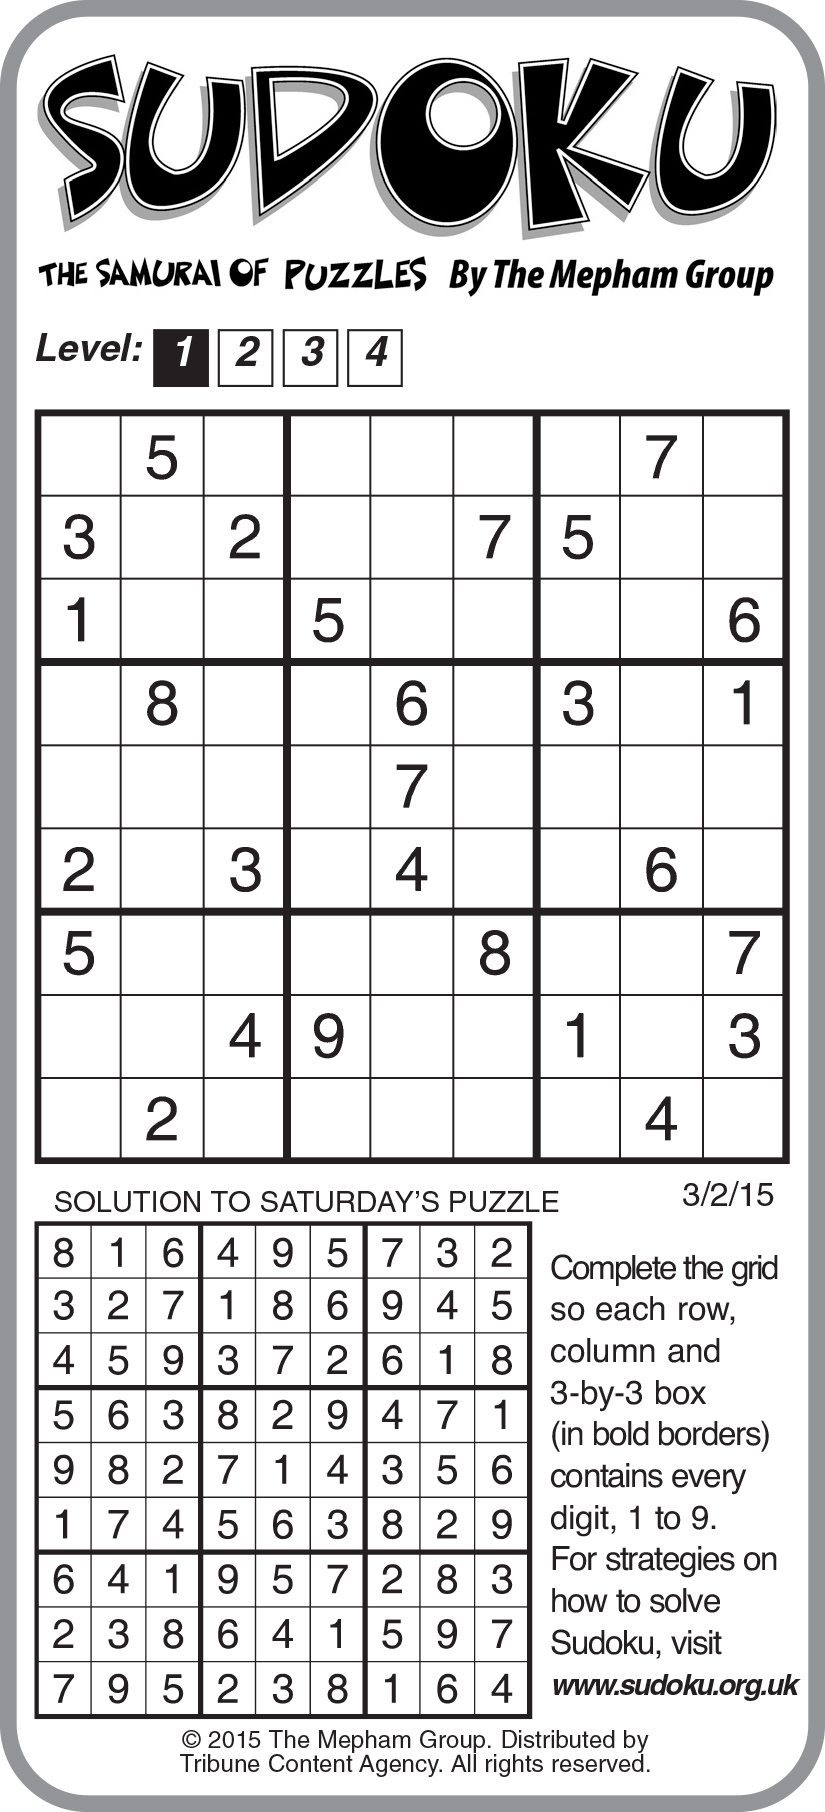 Sample Of Sudoku Daily Vertical Tribune Content Agency March 2 2015 